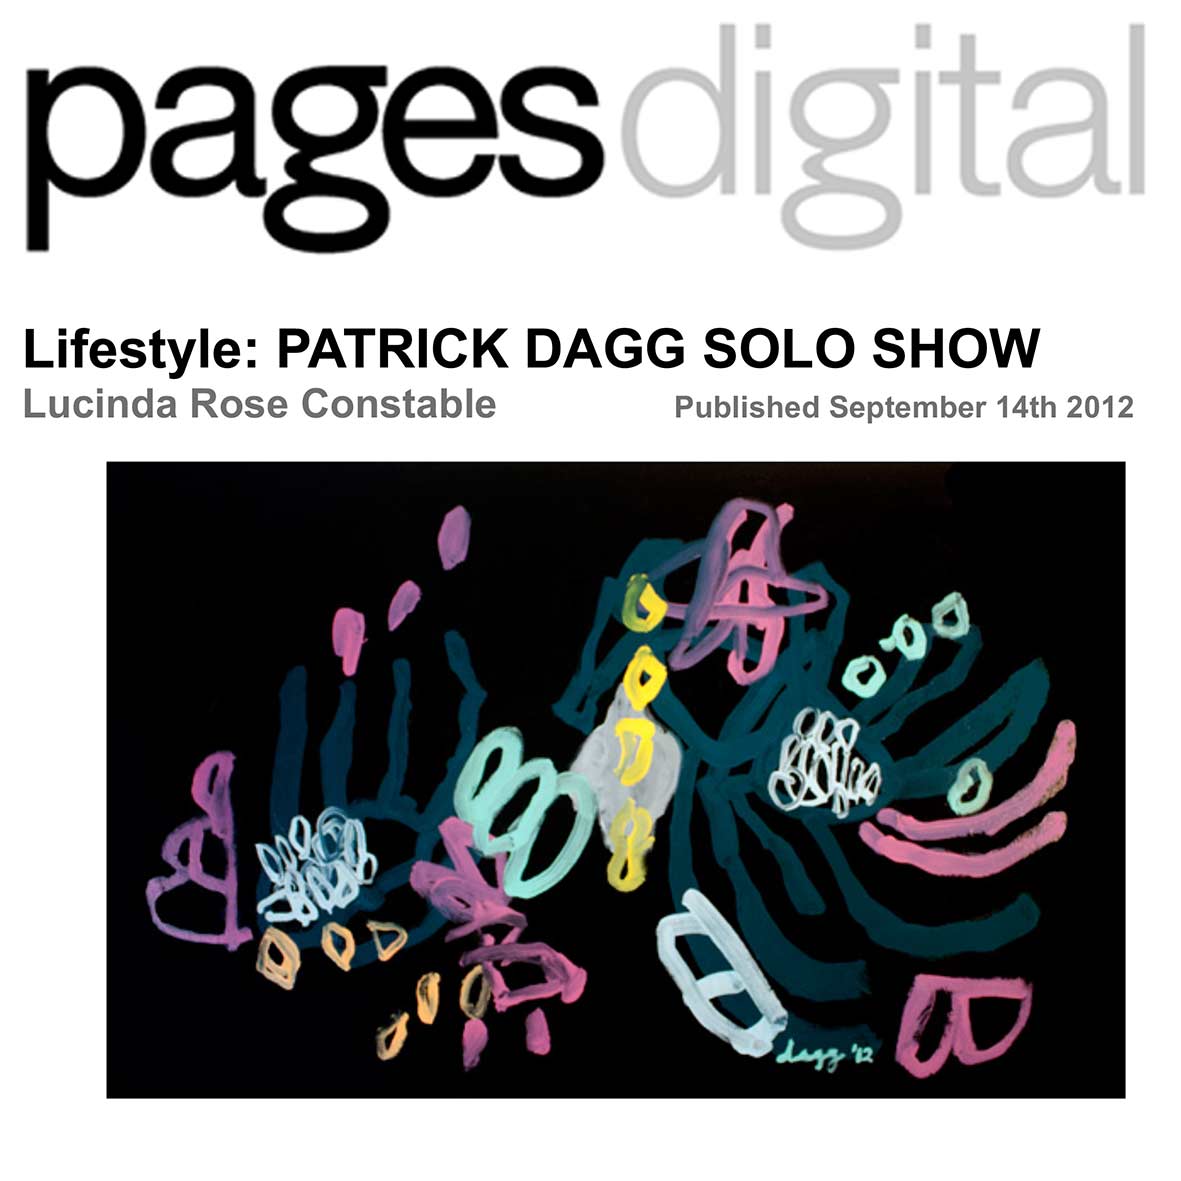 PagesDigital | Lifestyle | Patrick Dagg Solo Show | Lucinda Rose Constable | September 14th 2012